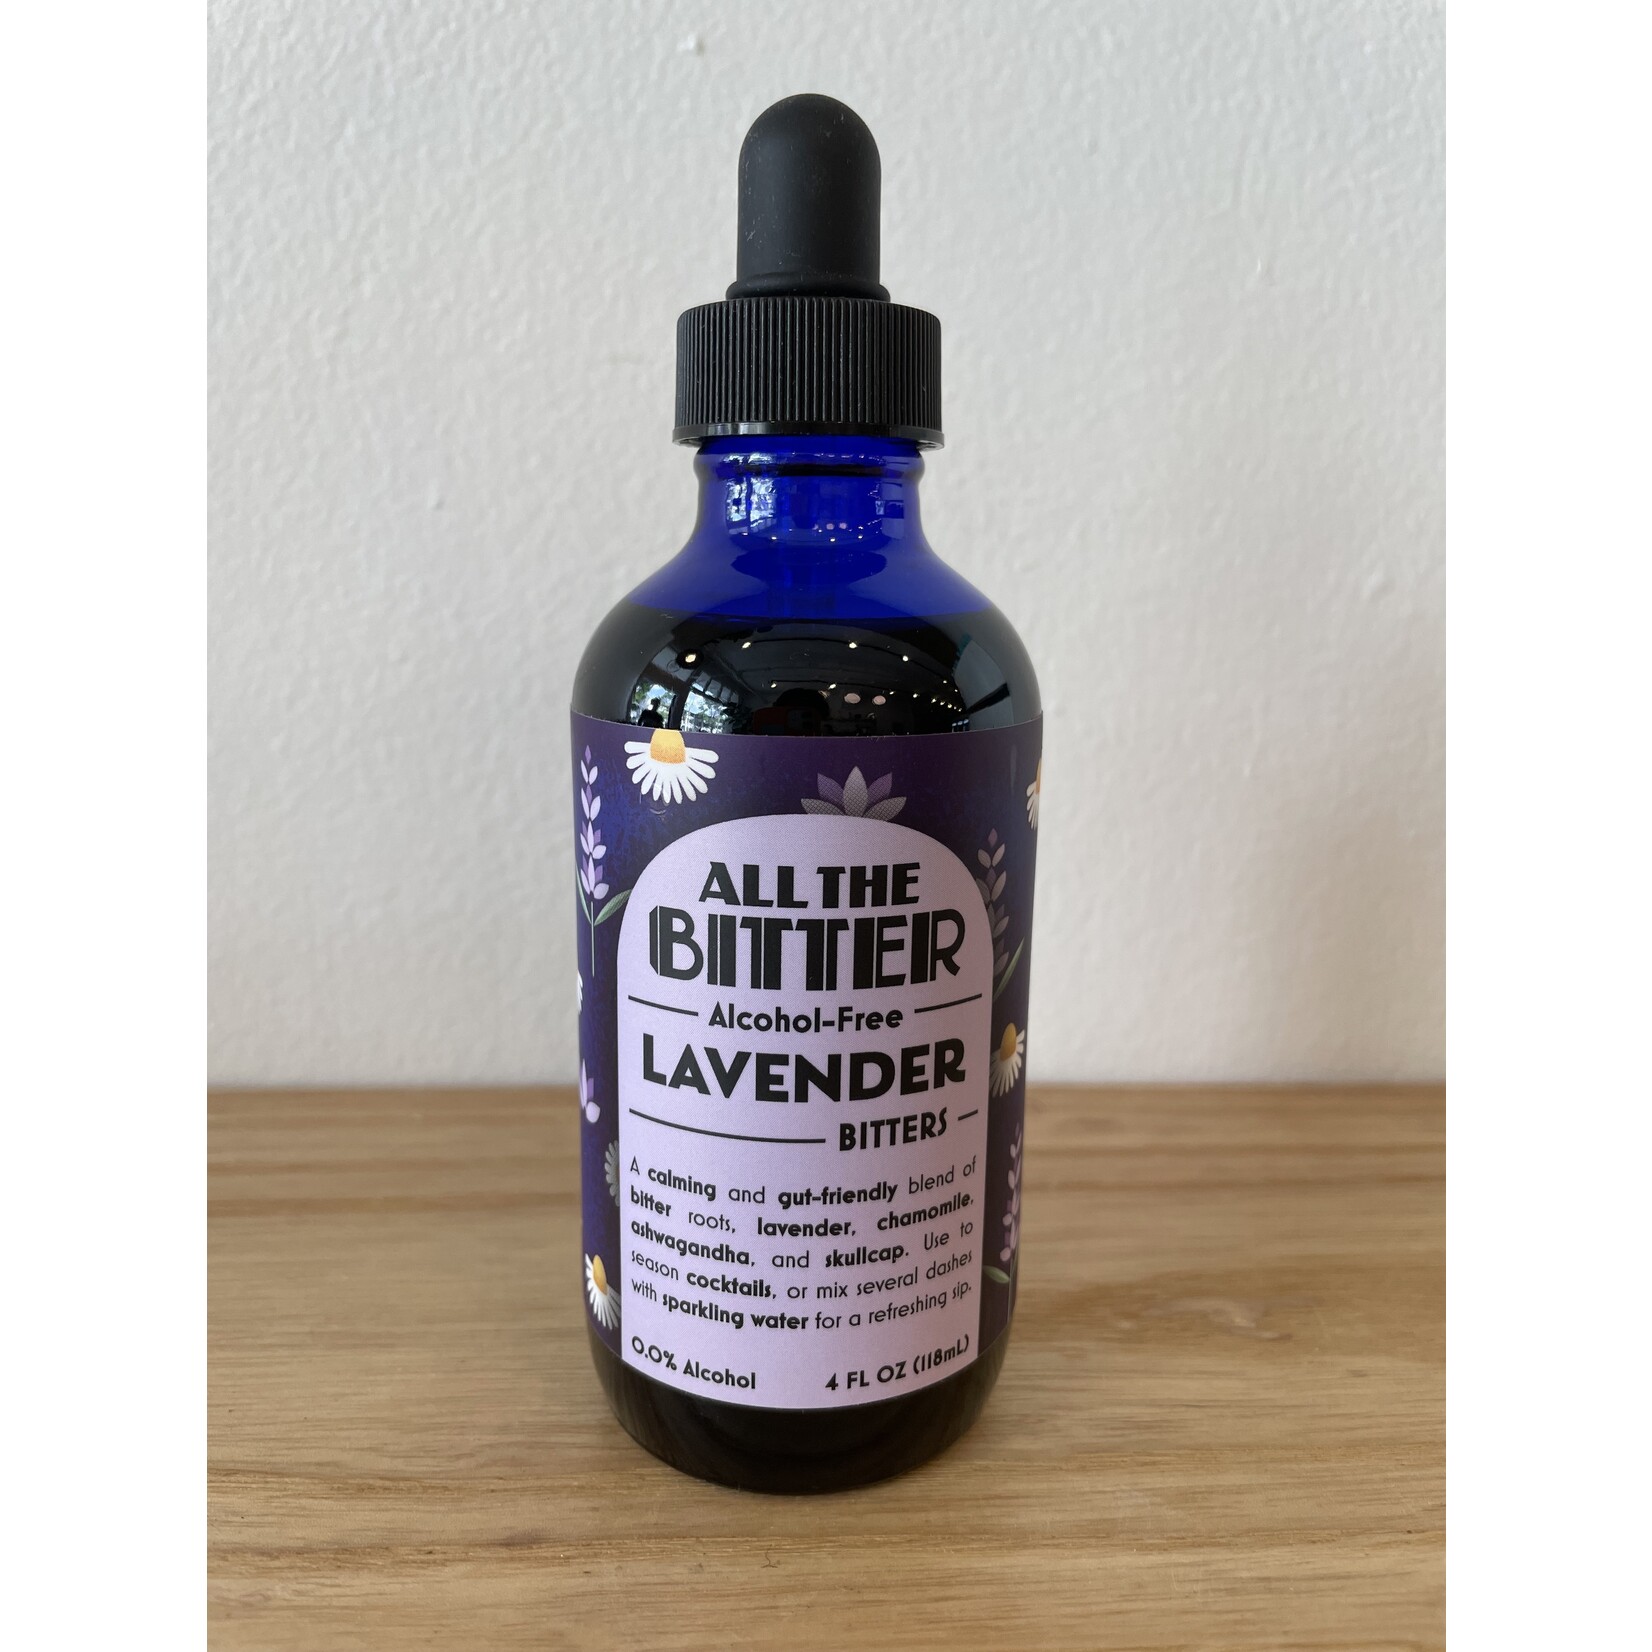 All the Bitter All the Bitter Lavender Bitters 4 oz.